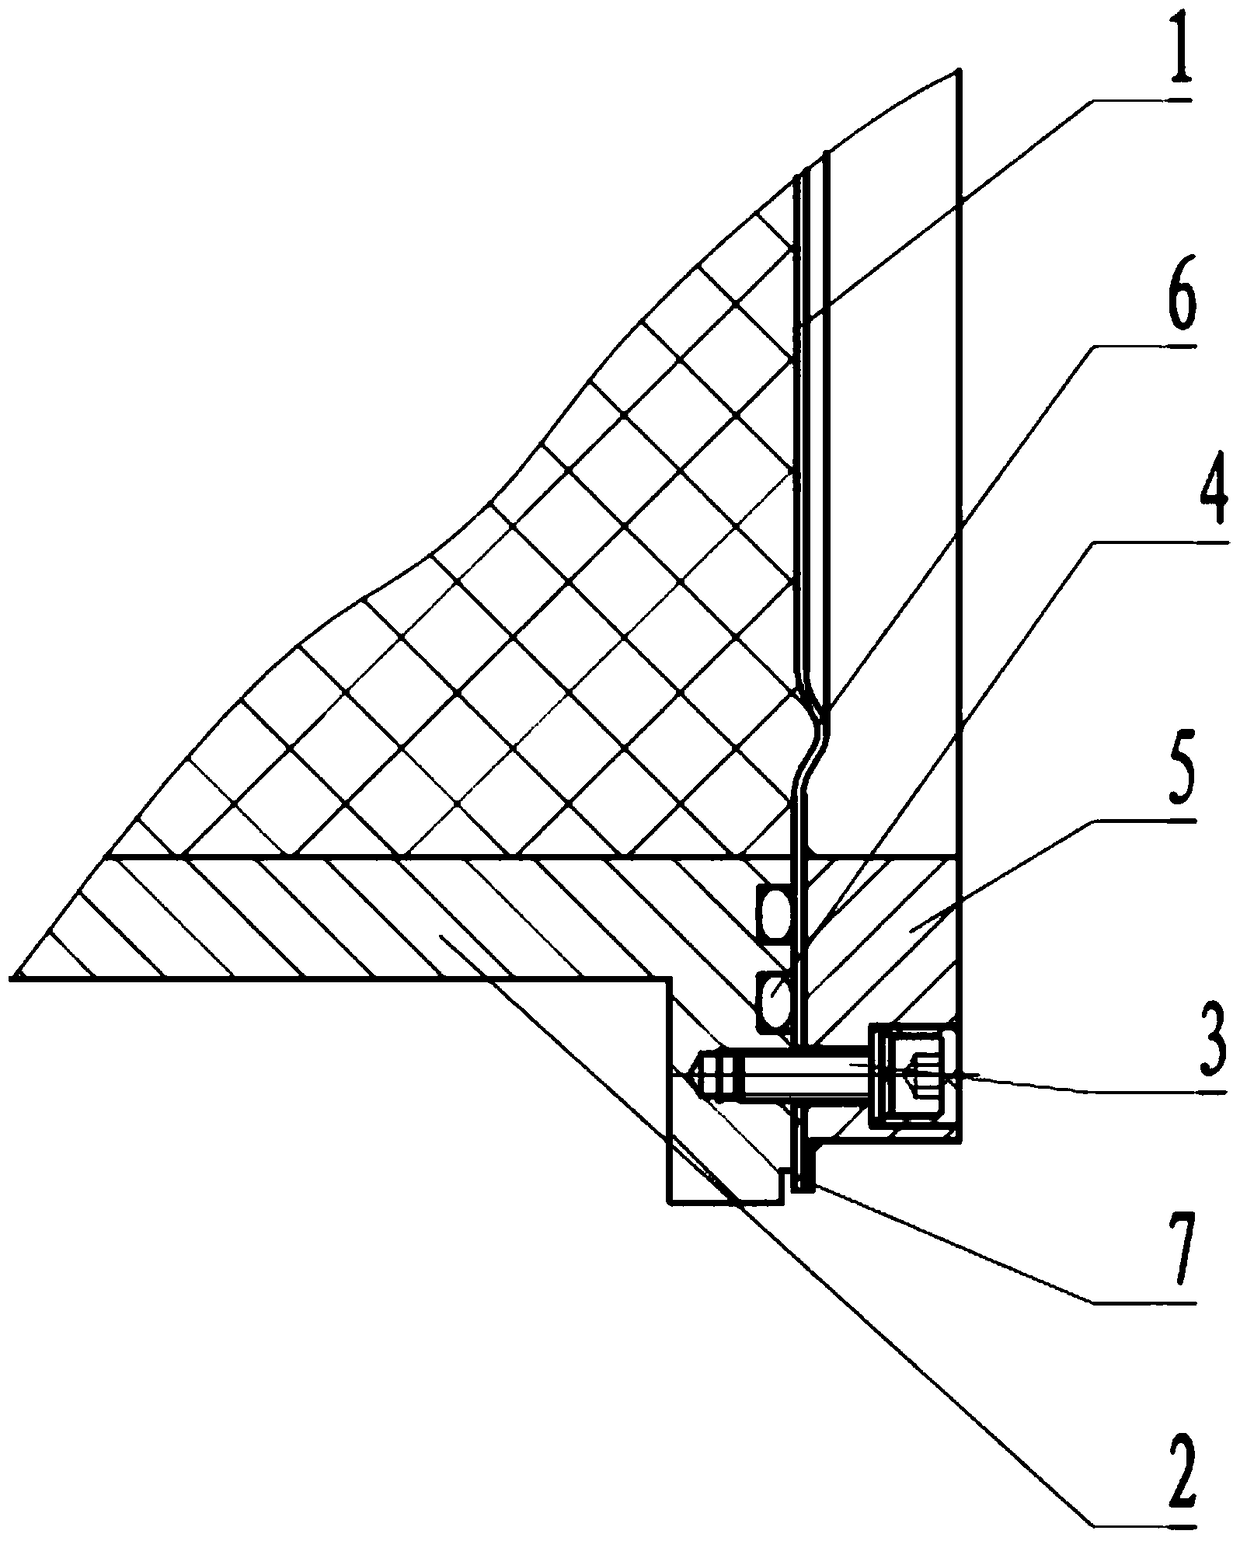 Acoustic windows and systems for large-scale planar transducer arrays